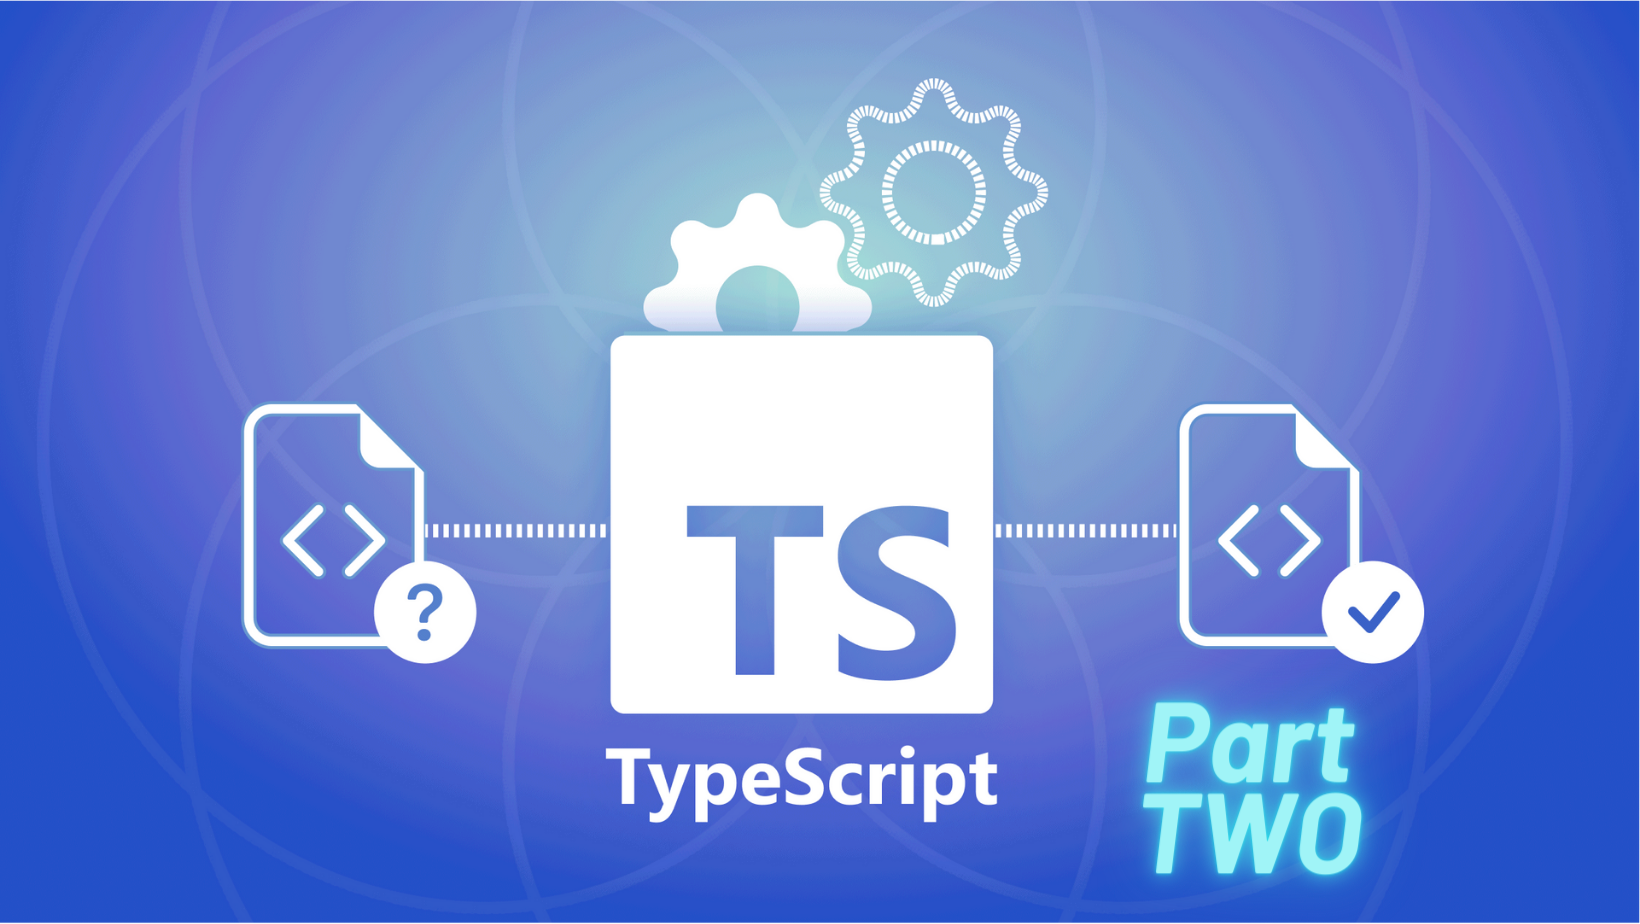 Improving code quality in Typescript with compiler options - Part 2